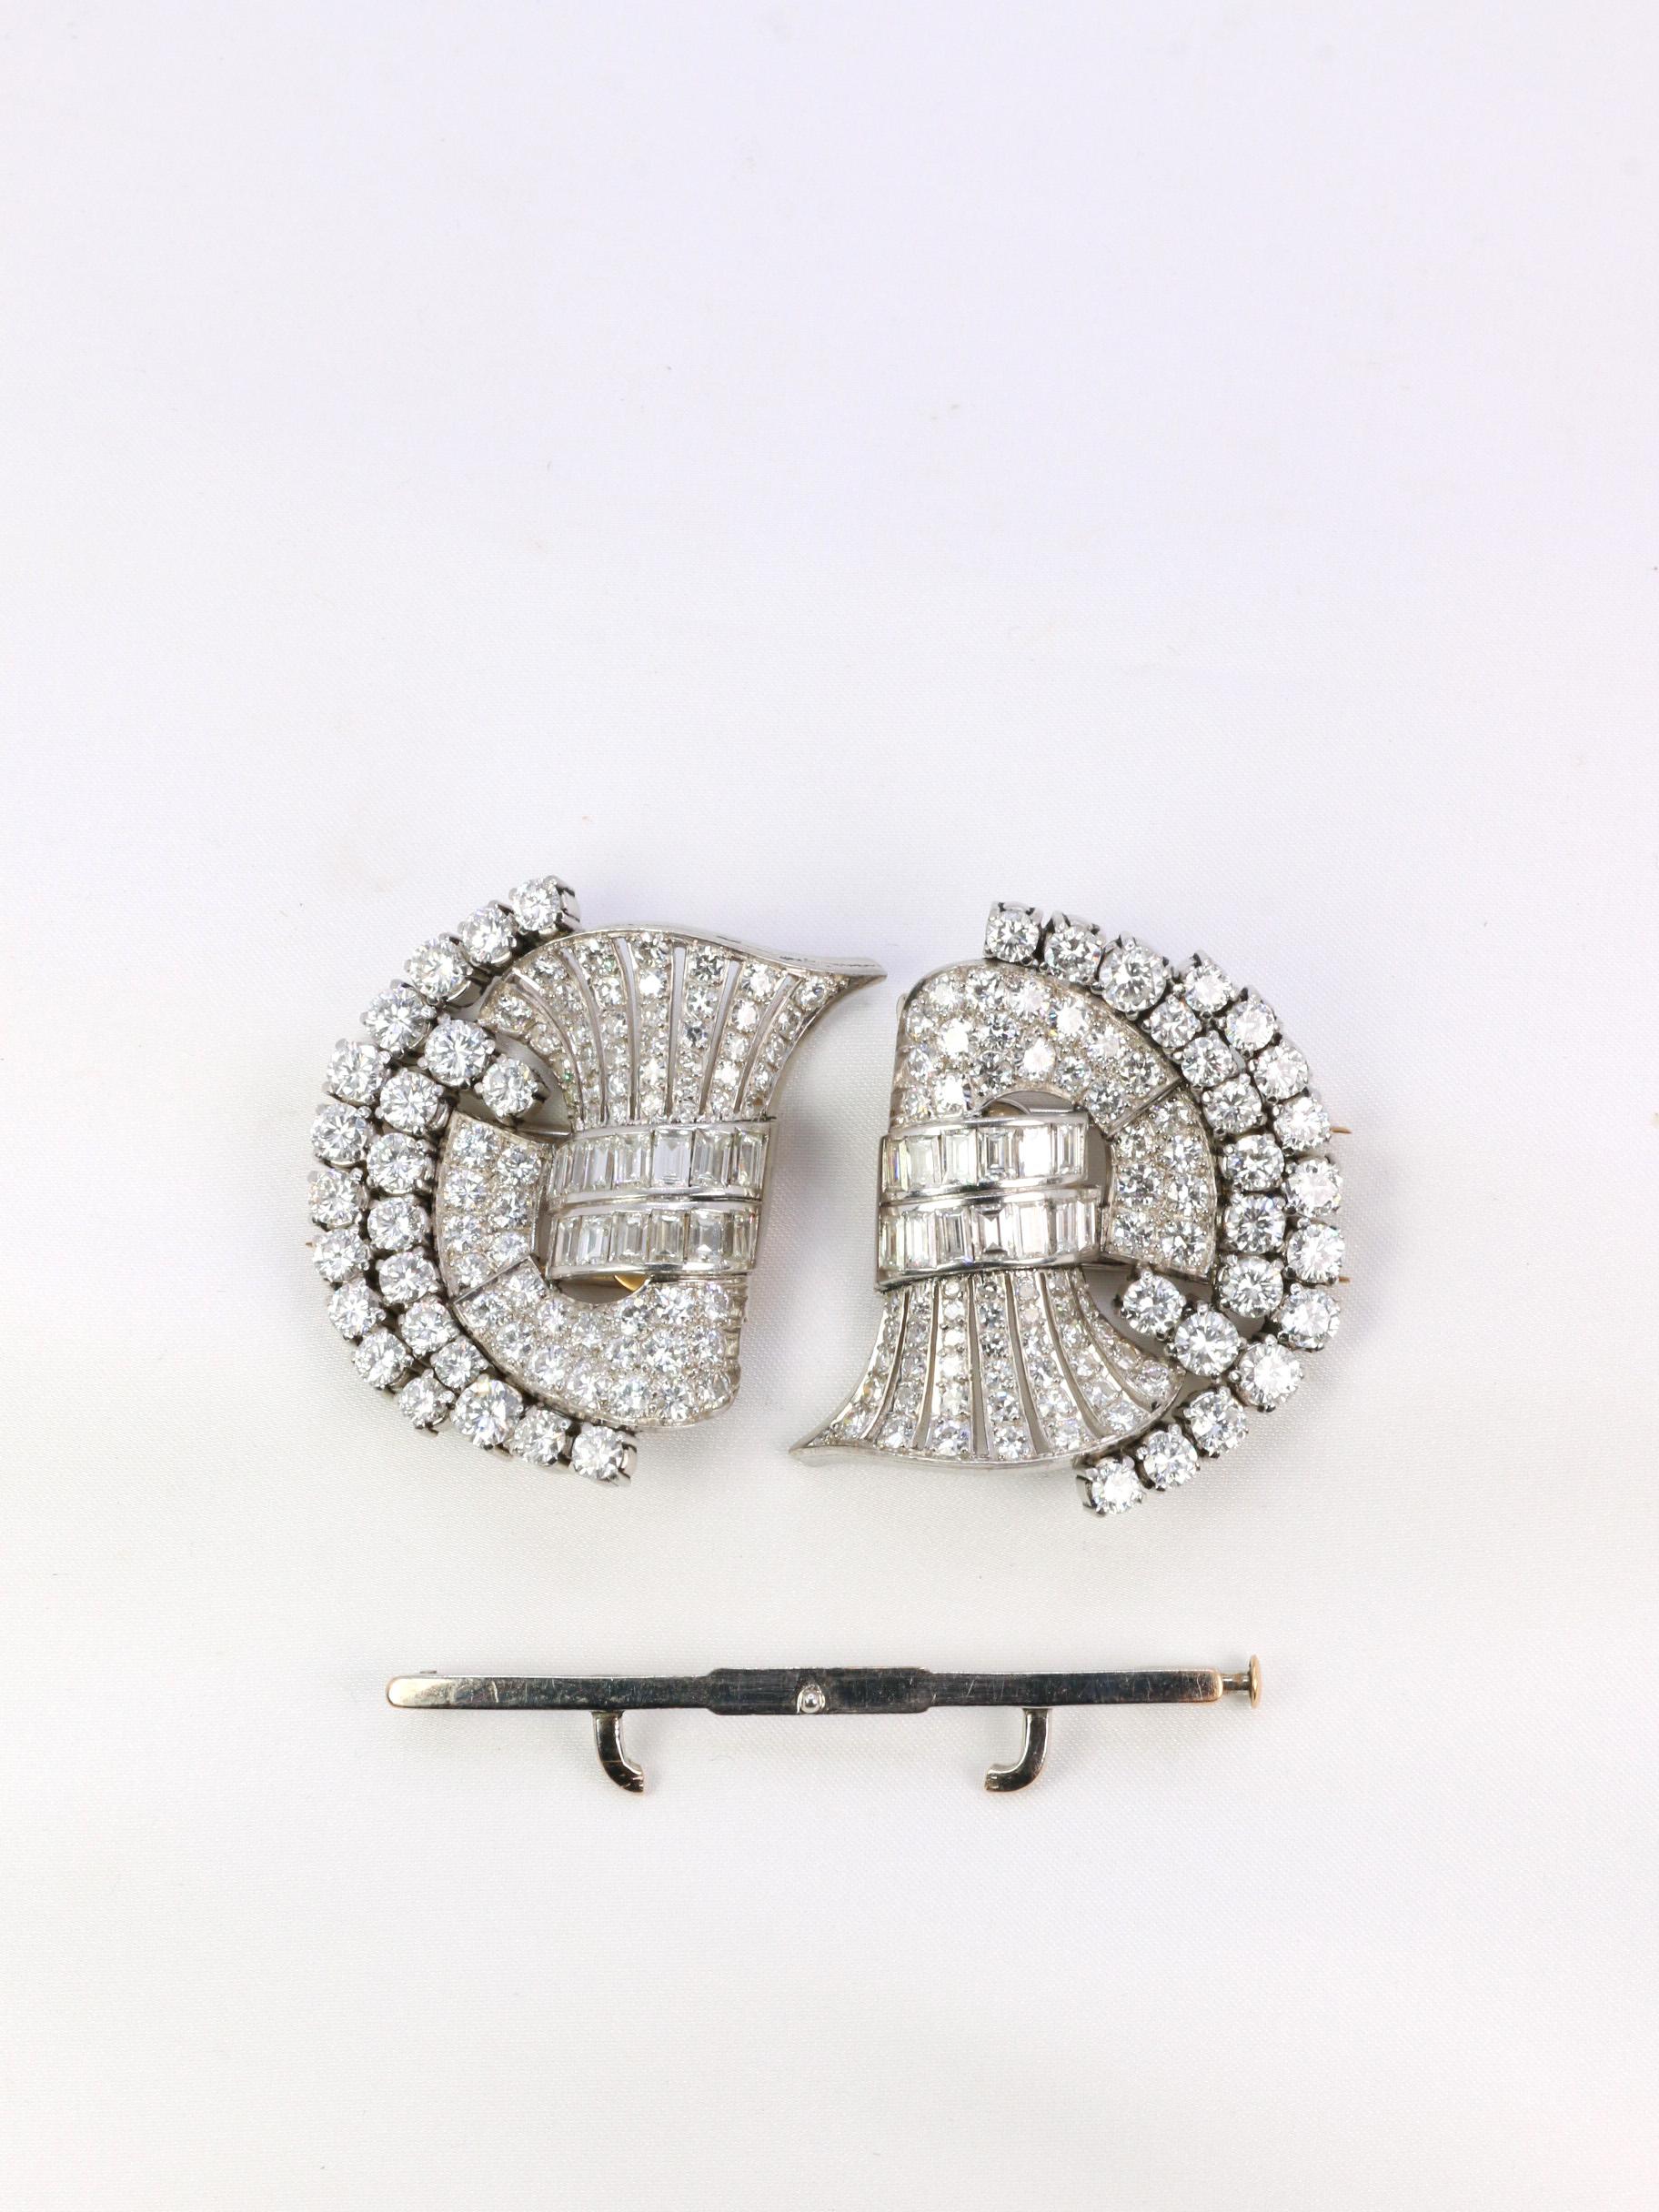 Double clip brooch in 18Kt (750°/°°) white gold and modern-cut diamonds for a total weight of approx. 18 carats, quality estimated GH VS to SI (clean to the naked eye). Work of the 1950's.

Length: 6 cm
Width: 3.6 cm 
Weight: 42.98 grams